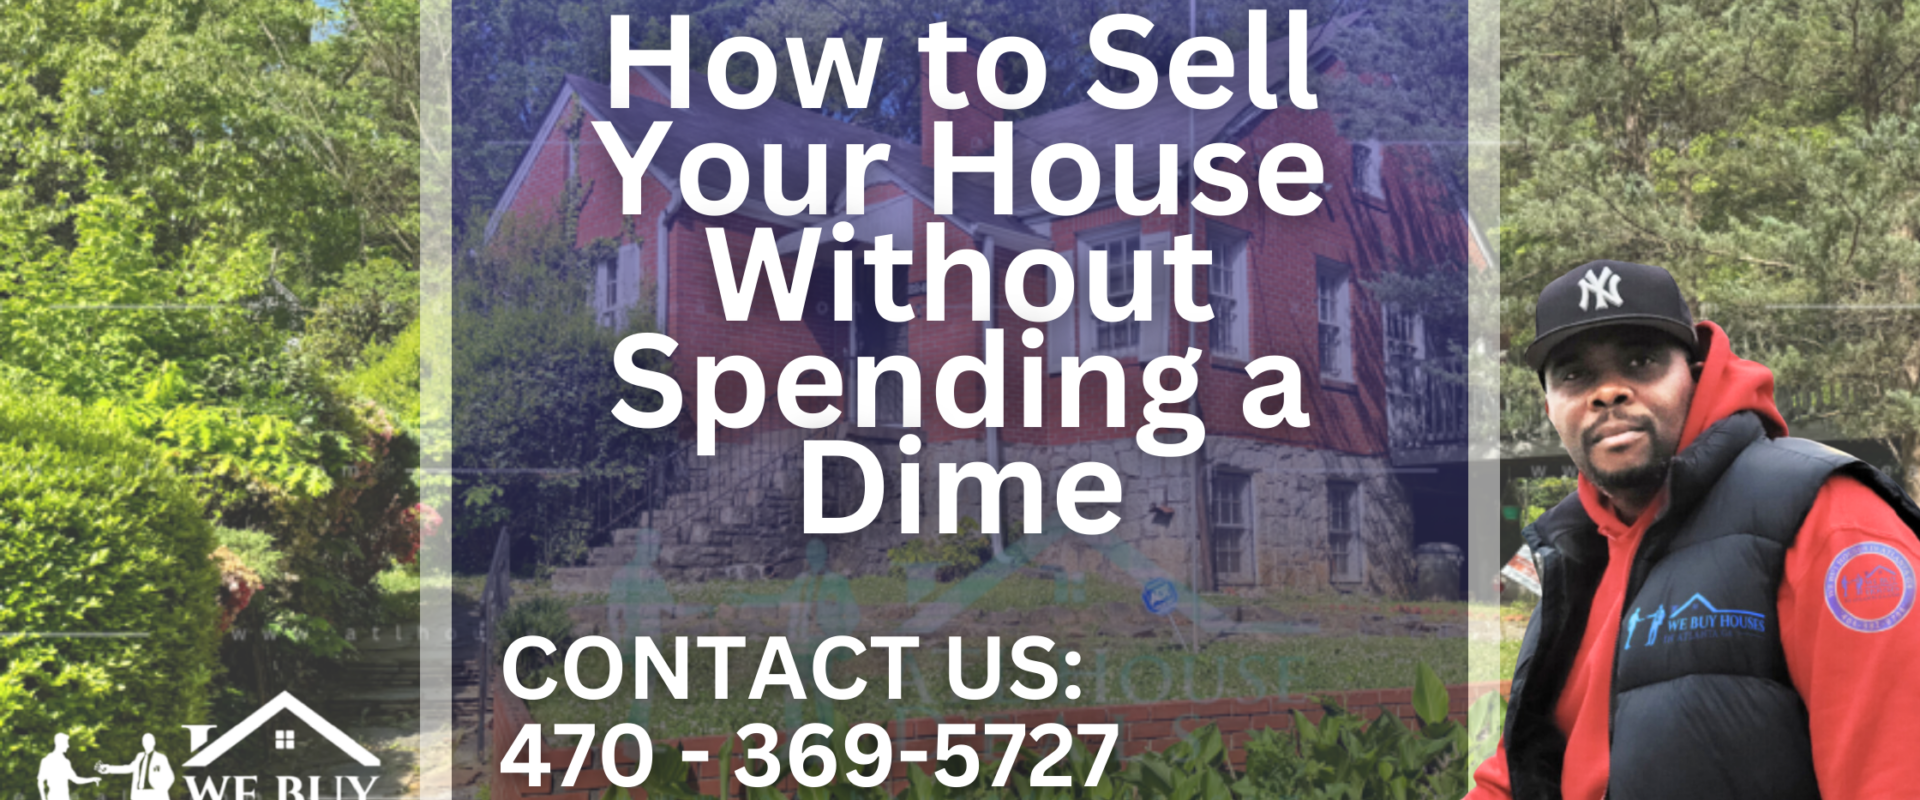 How to Sell Your House Without Spending a Dime